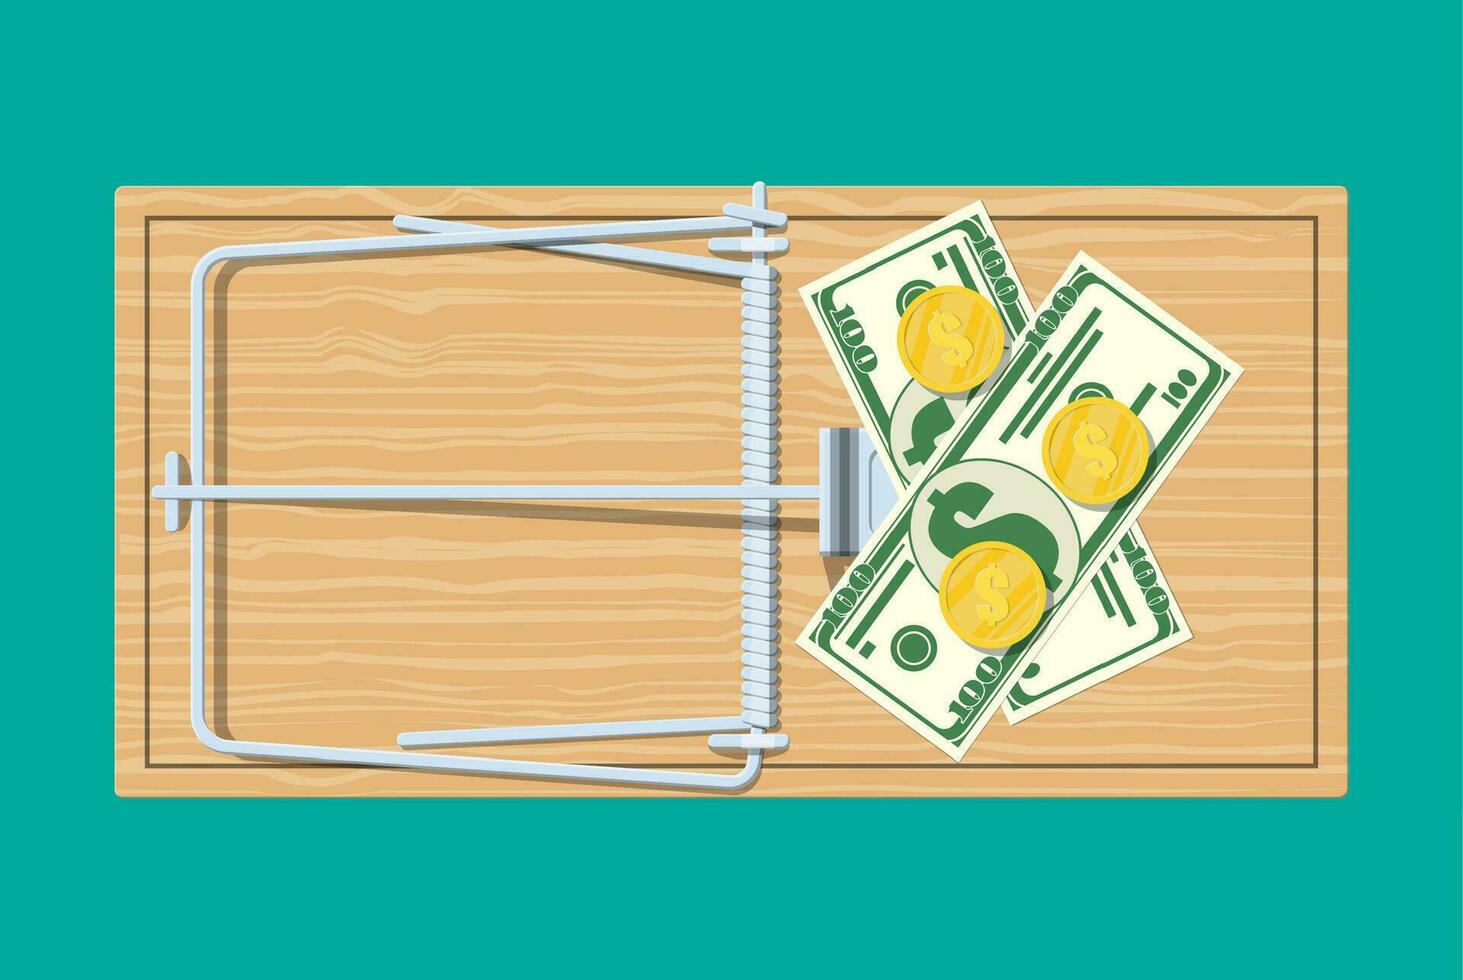 Wooden mouse trap with dollar banknotes and golden coins, classical spring loaded bar trap. Top view. Fraud, freebie, crime and lie. Vector illustration in flat style